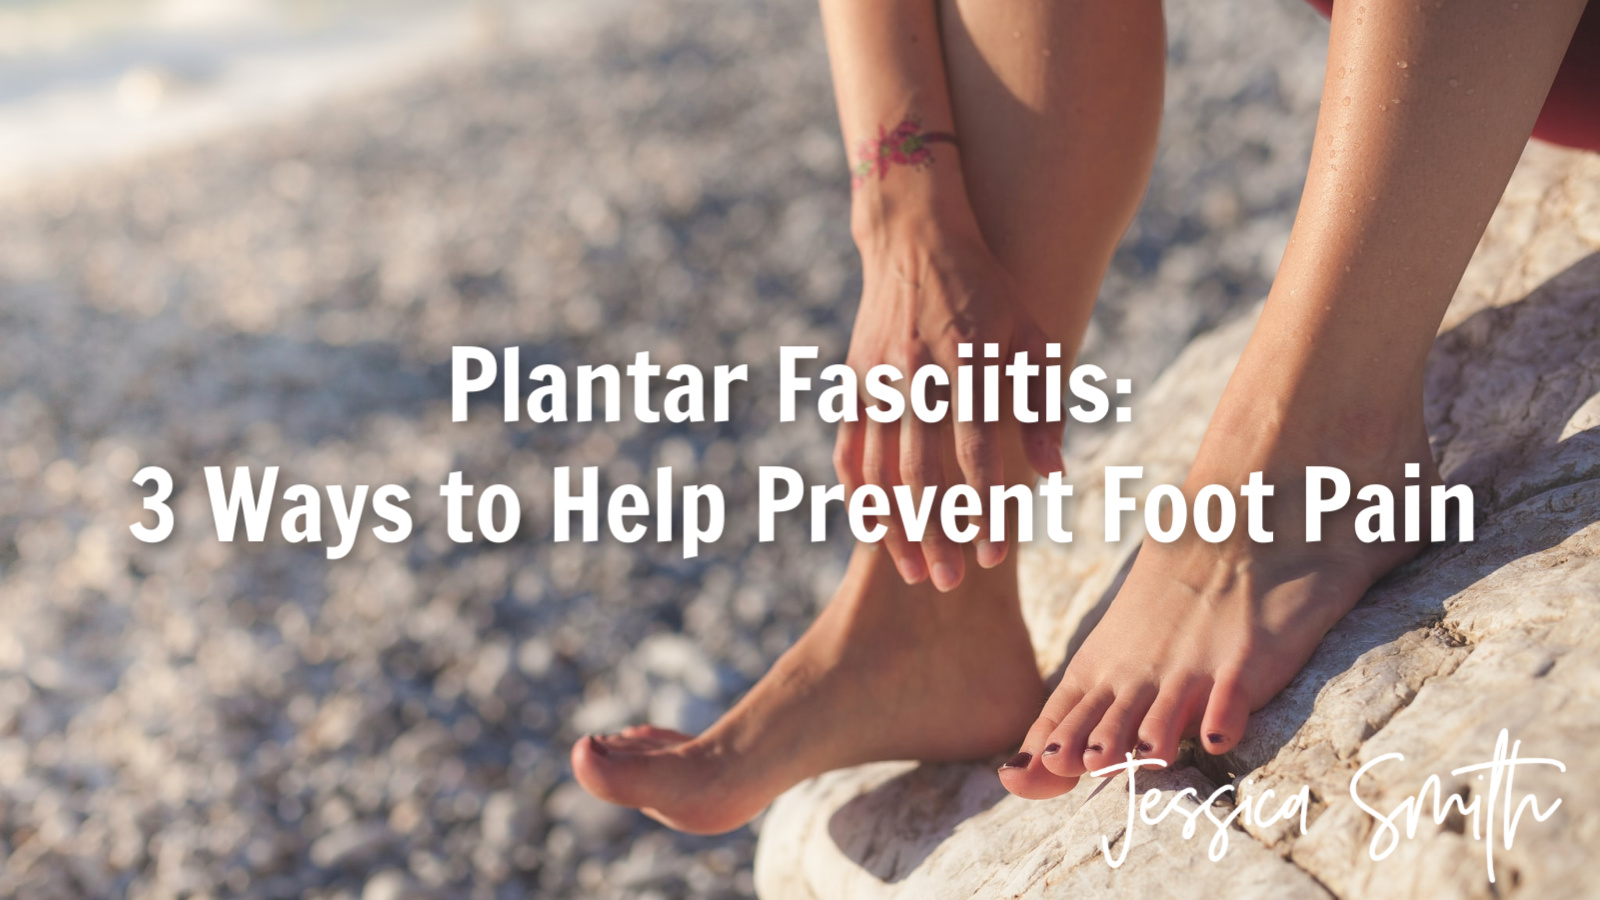 Plantar Fasciitis/ 3 Ways to Help Prevent Foot Pain_Image of bare feet on the Beach_Article By Jessica Smith